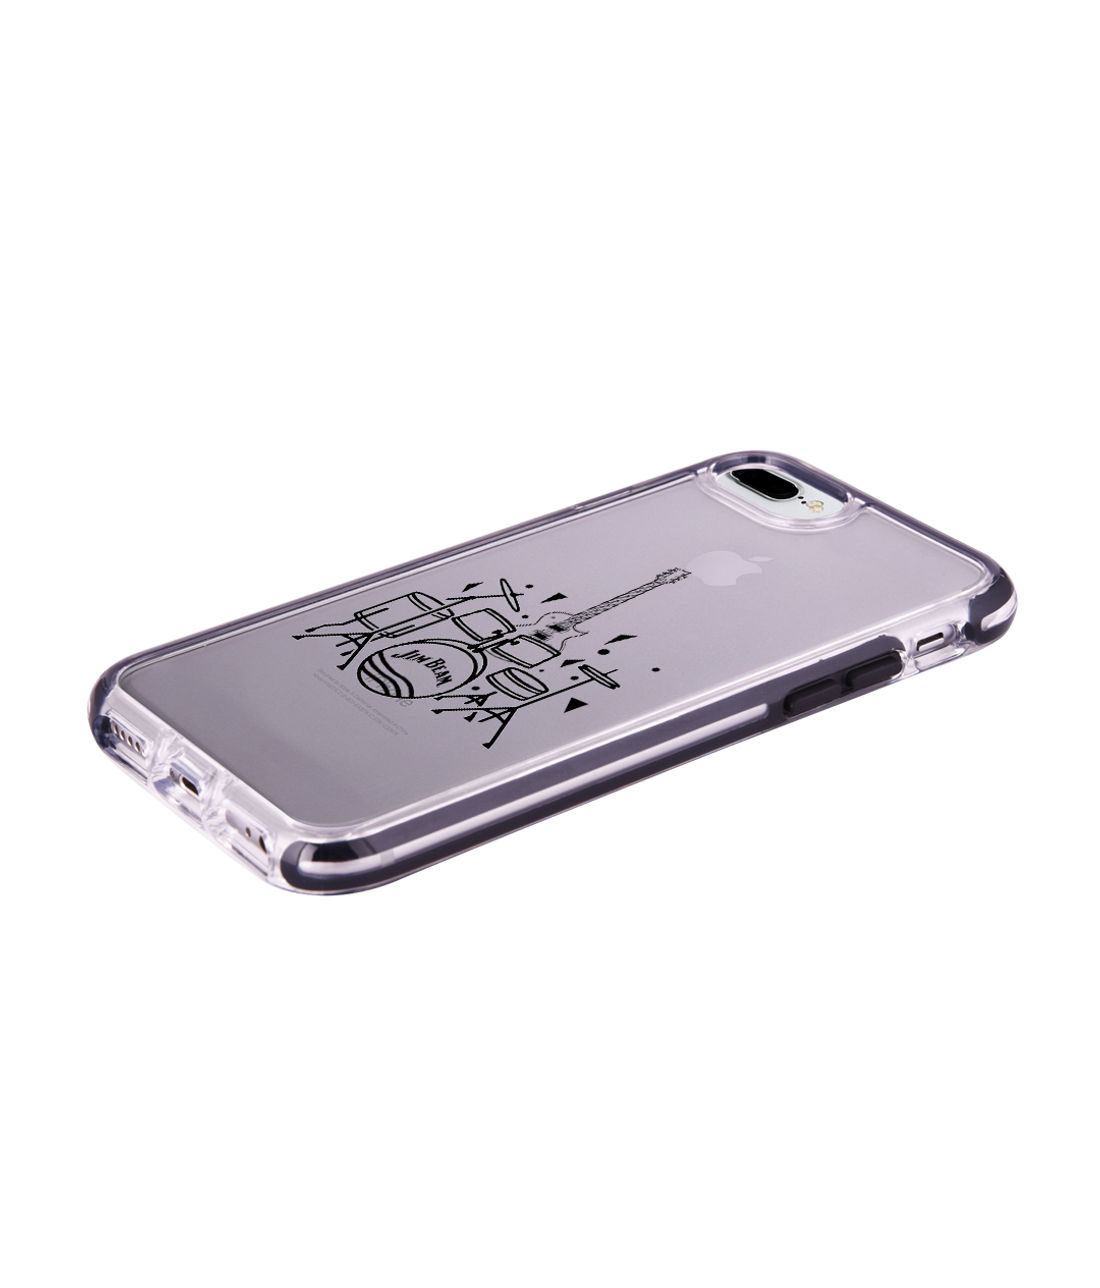 Jim Beam The Band - Shield Case for iPhone 8 Plus